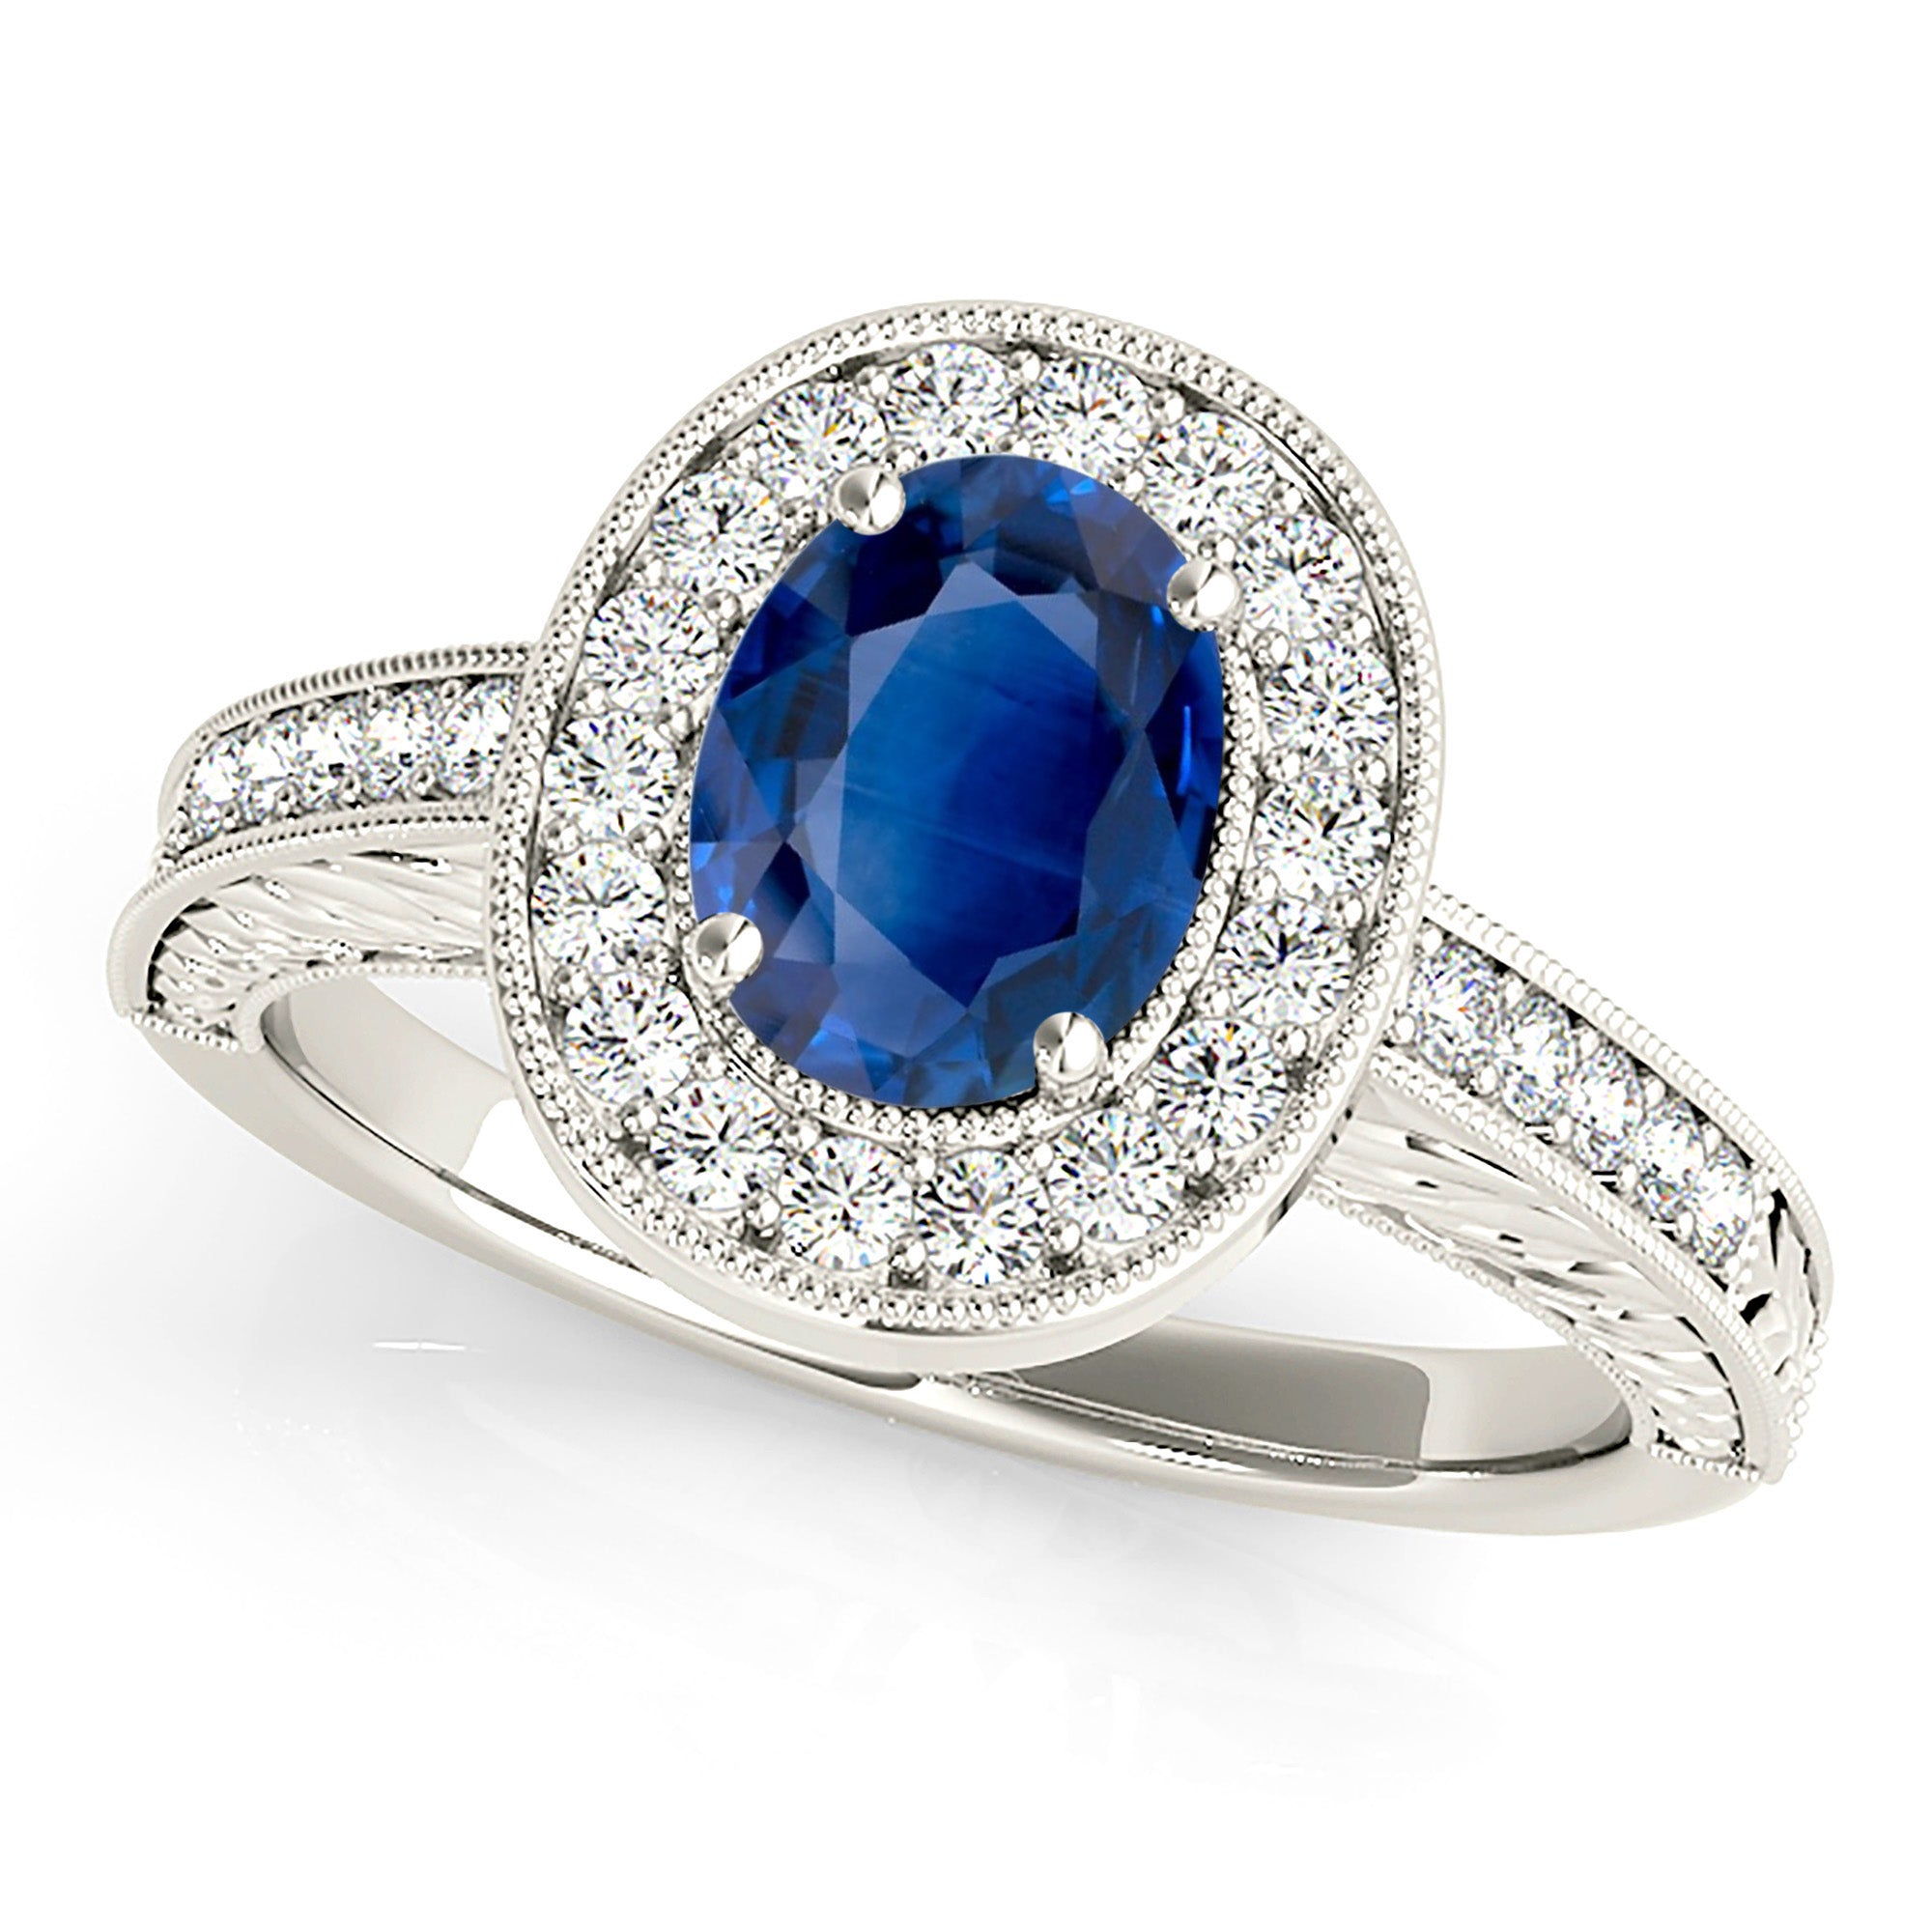 2.09 ct. Genuine Blue Oval Sapphire Ring With 0.35 ctw. Diamond Halo, Milgrain Diamond Band,Filigree Side Accent |Sapphire And Diamond Ring-in 14K/18K White, Yellow, Rose Gold and Platinum - Christmas Jewelry Gift -VIRABYANI